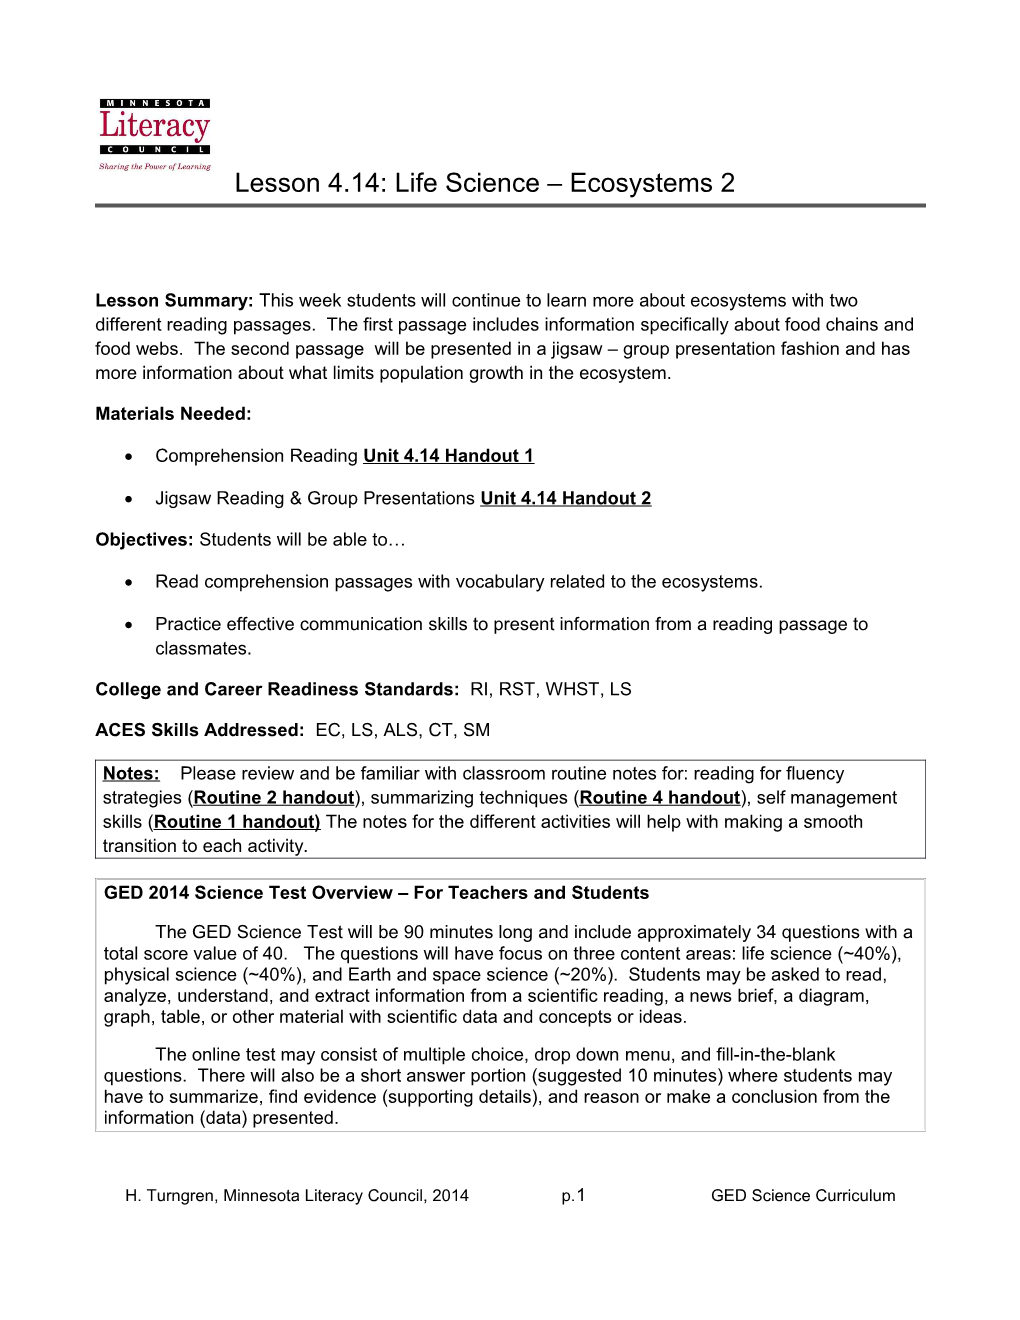 Lesson 4.14: Life Science Ecosystems 2